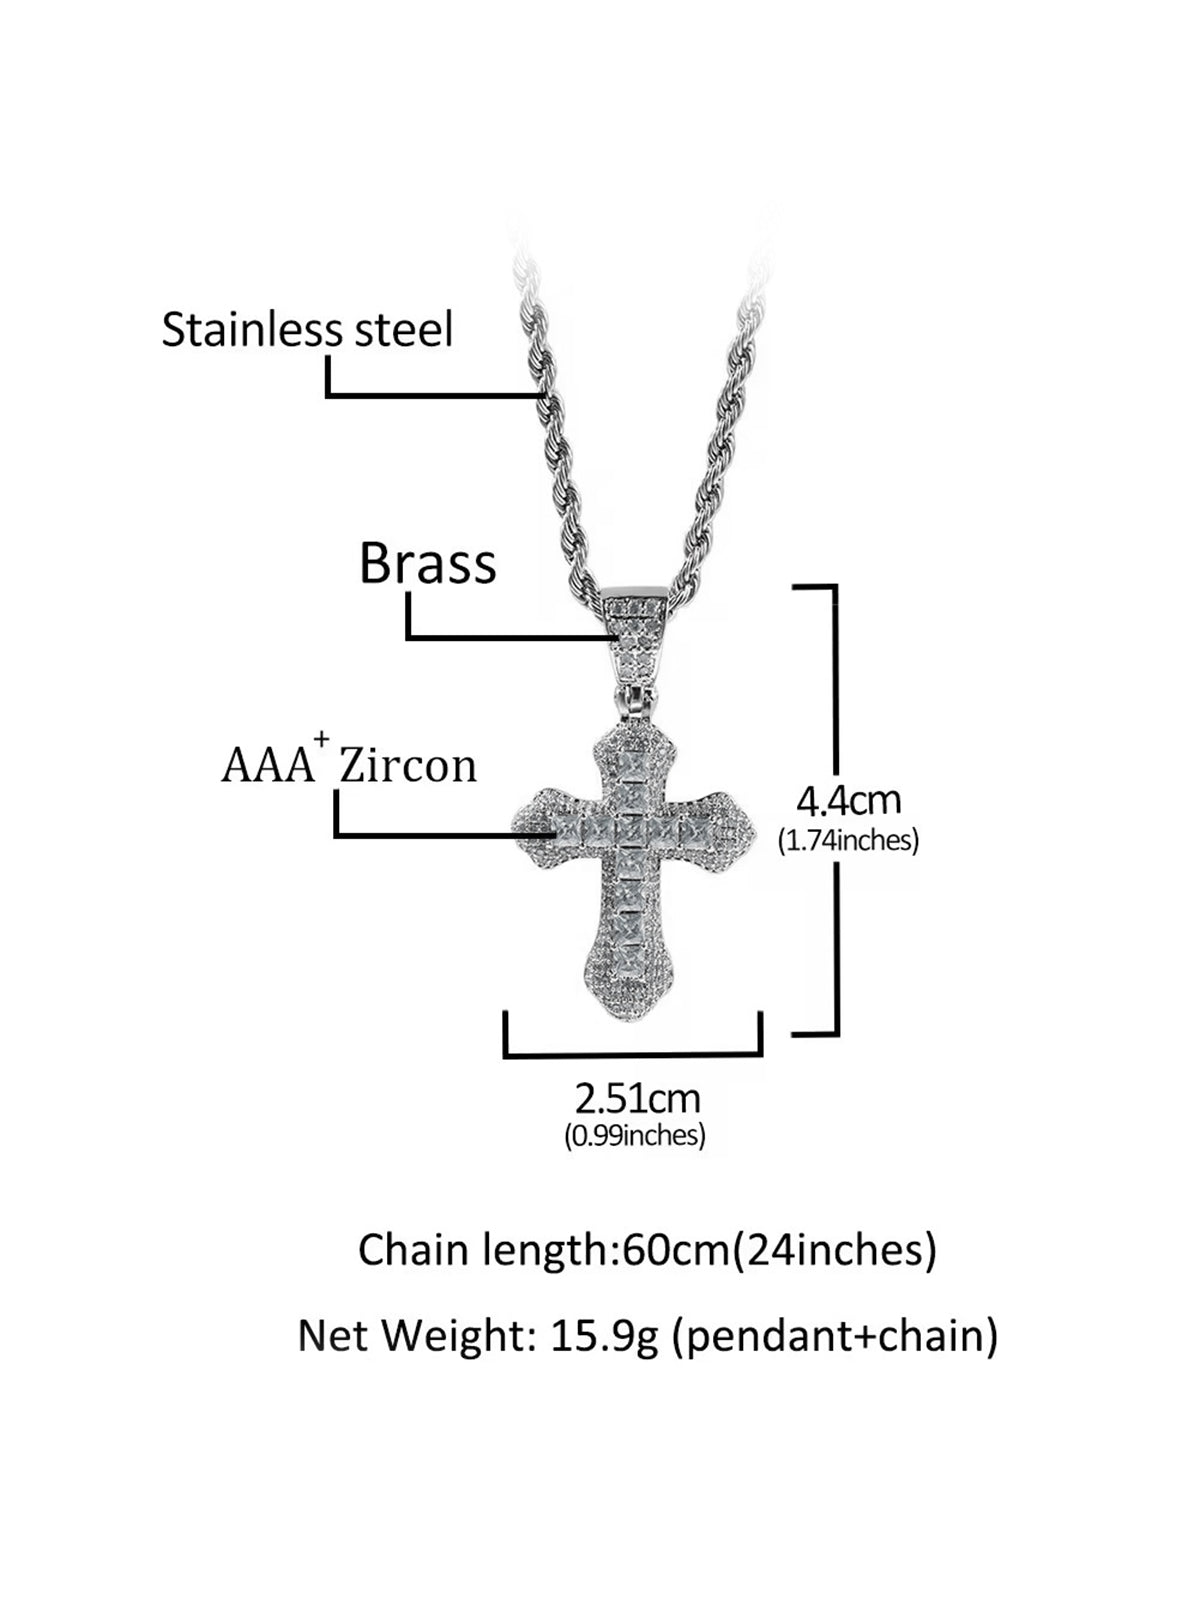 Full Pave Cross Necklace